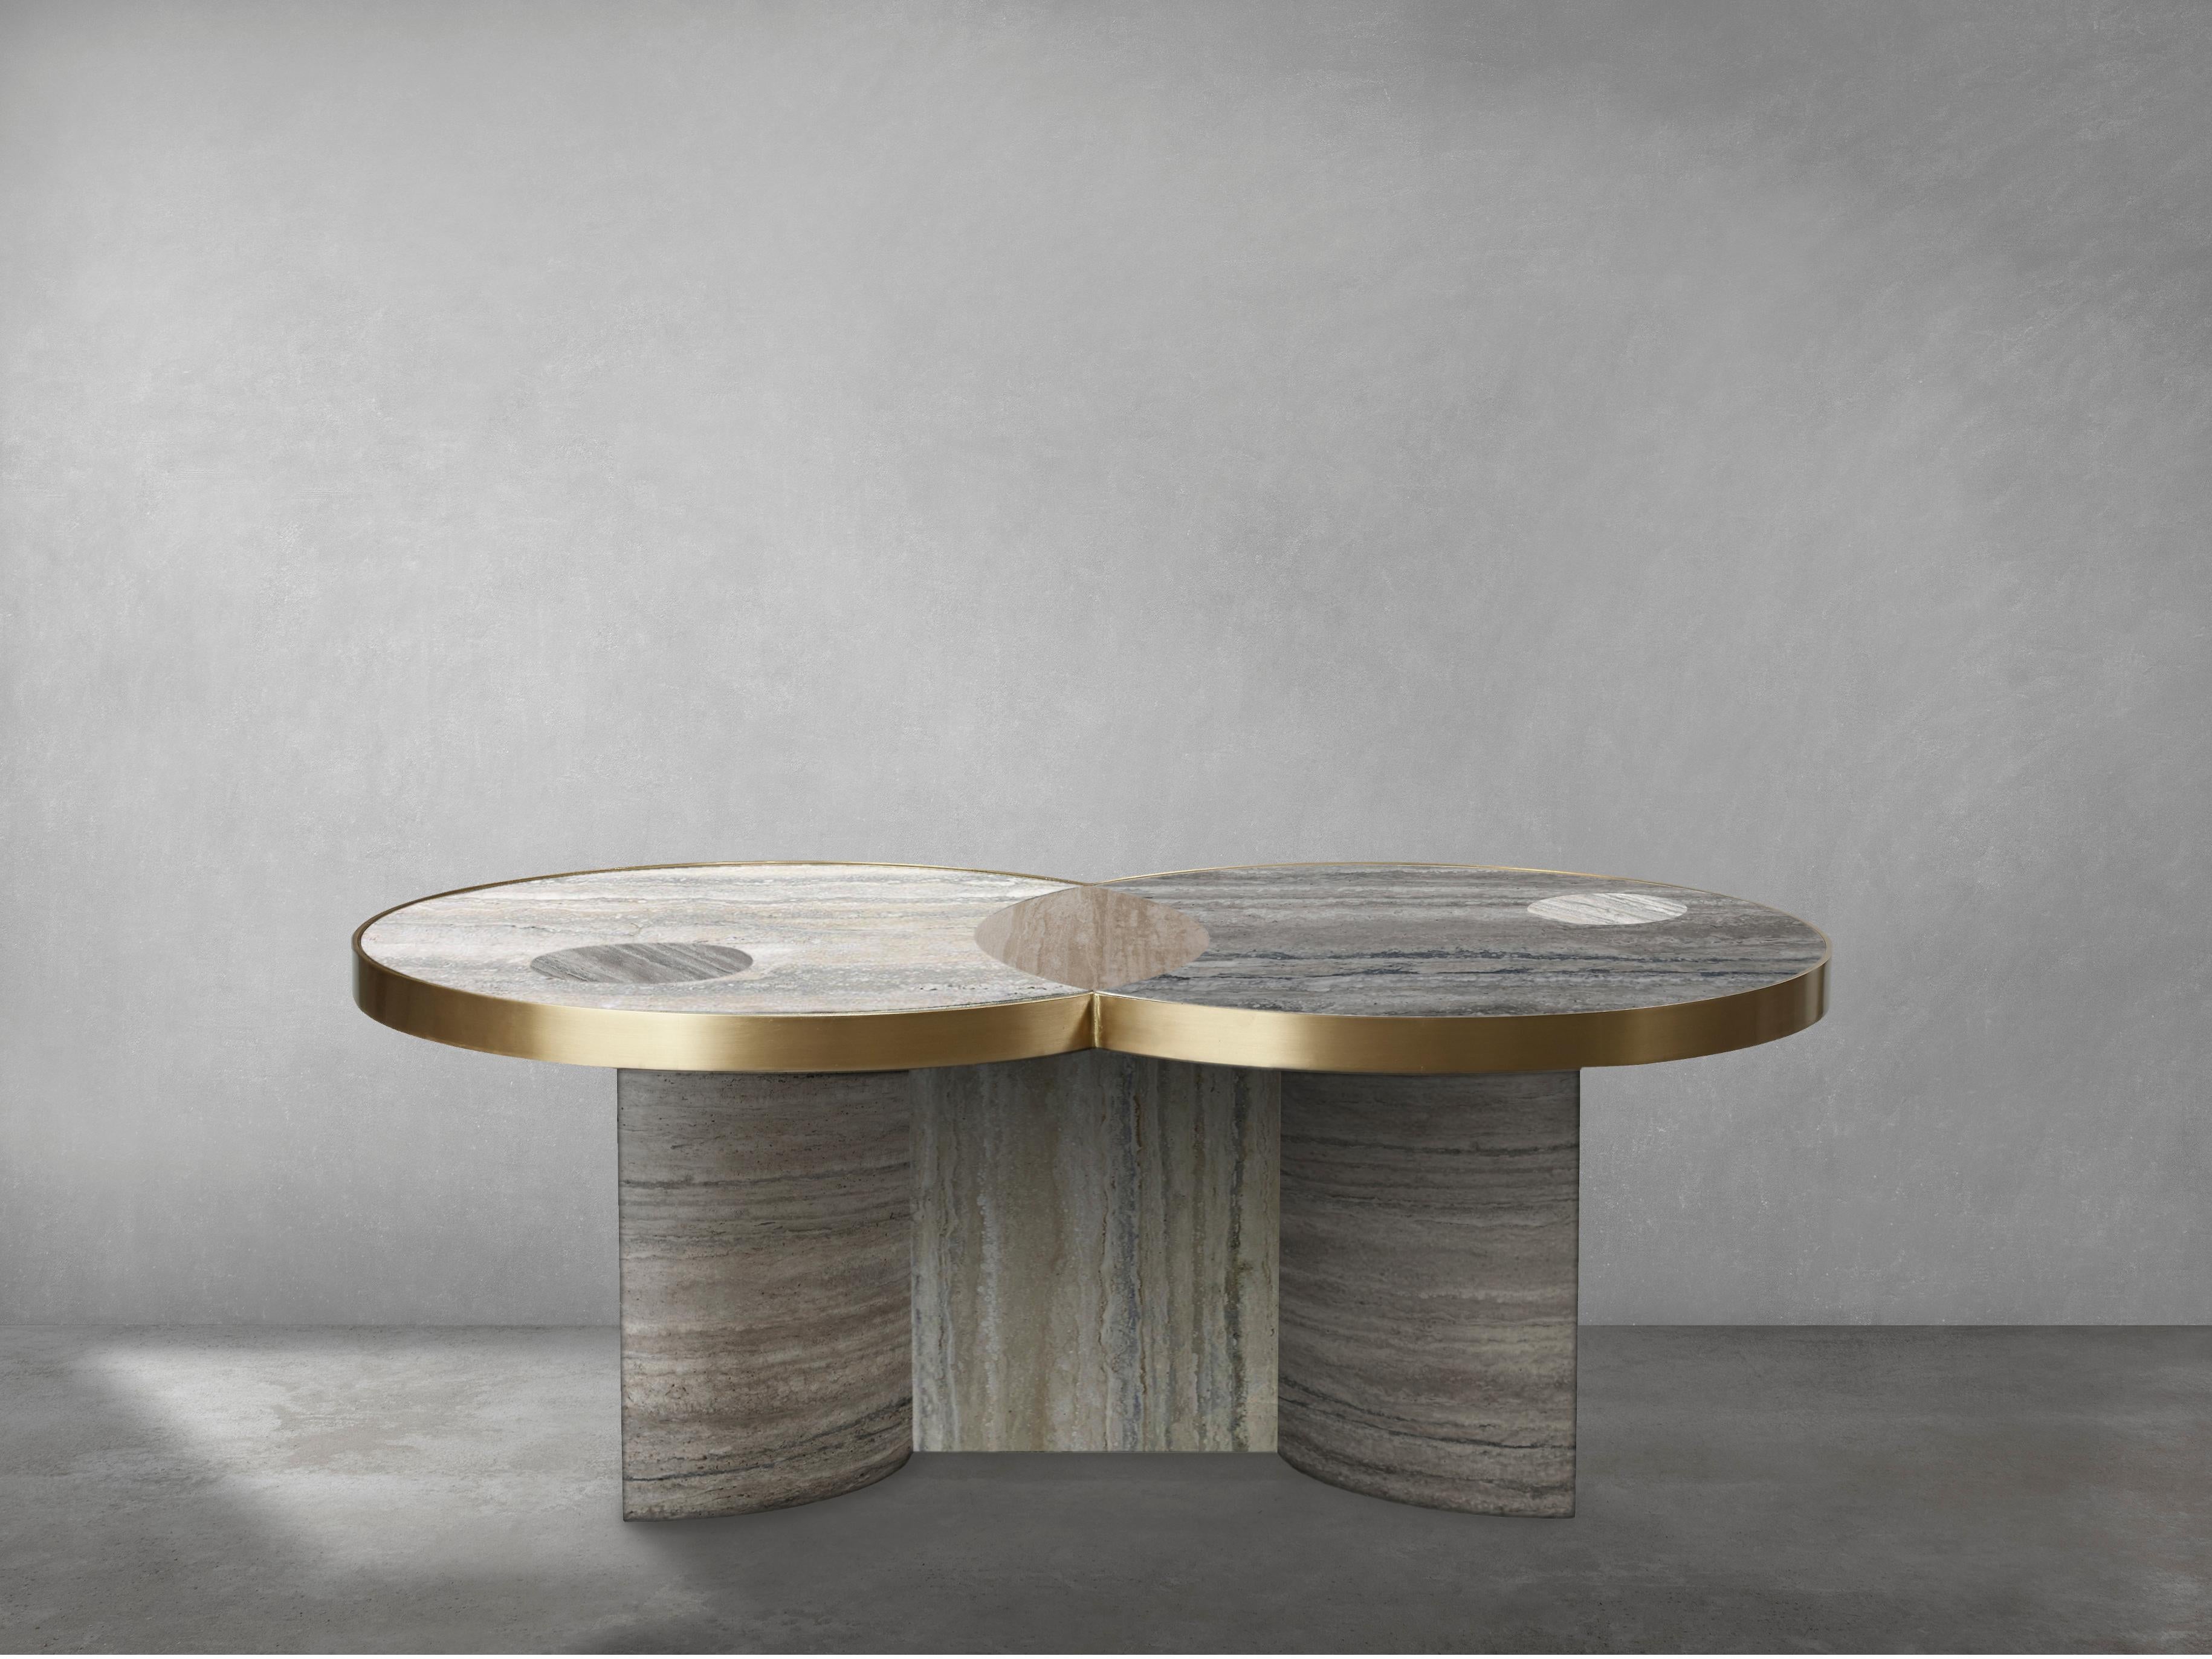 Portuguese Sun and Moon Marble and Brass Coffee Table, Travertine, Geometric by Lara Bohinc For Sale